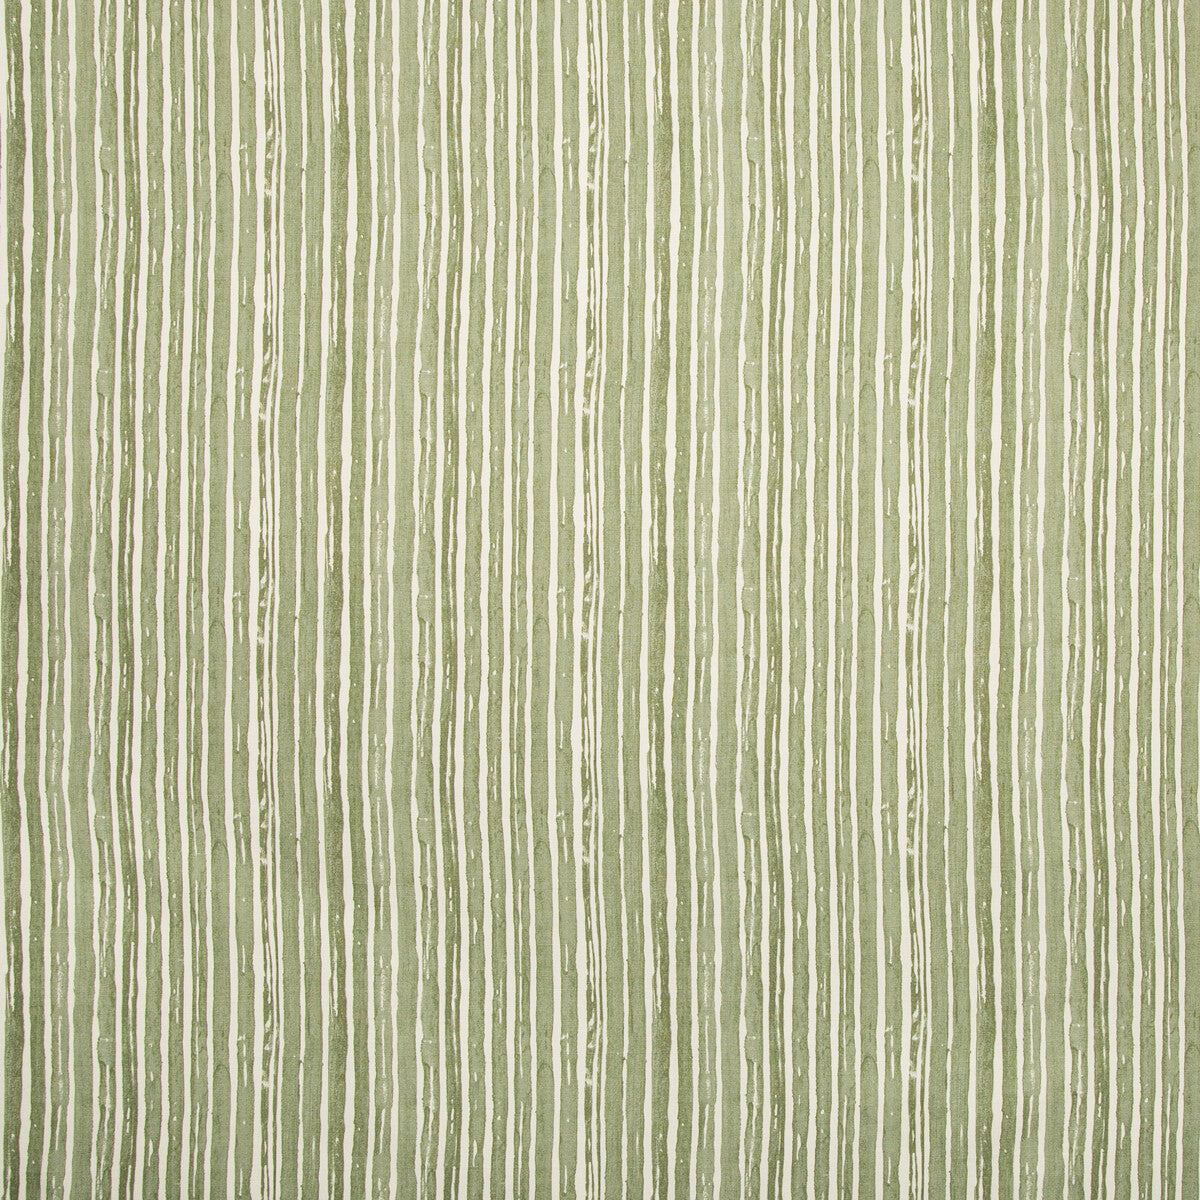 Benson Stripe fabric in pine color - pattern 2019151.30.0 - by Lee Jofa in the Carrier And Company collection